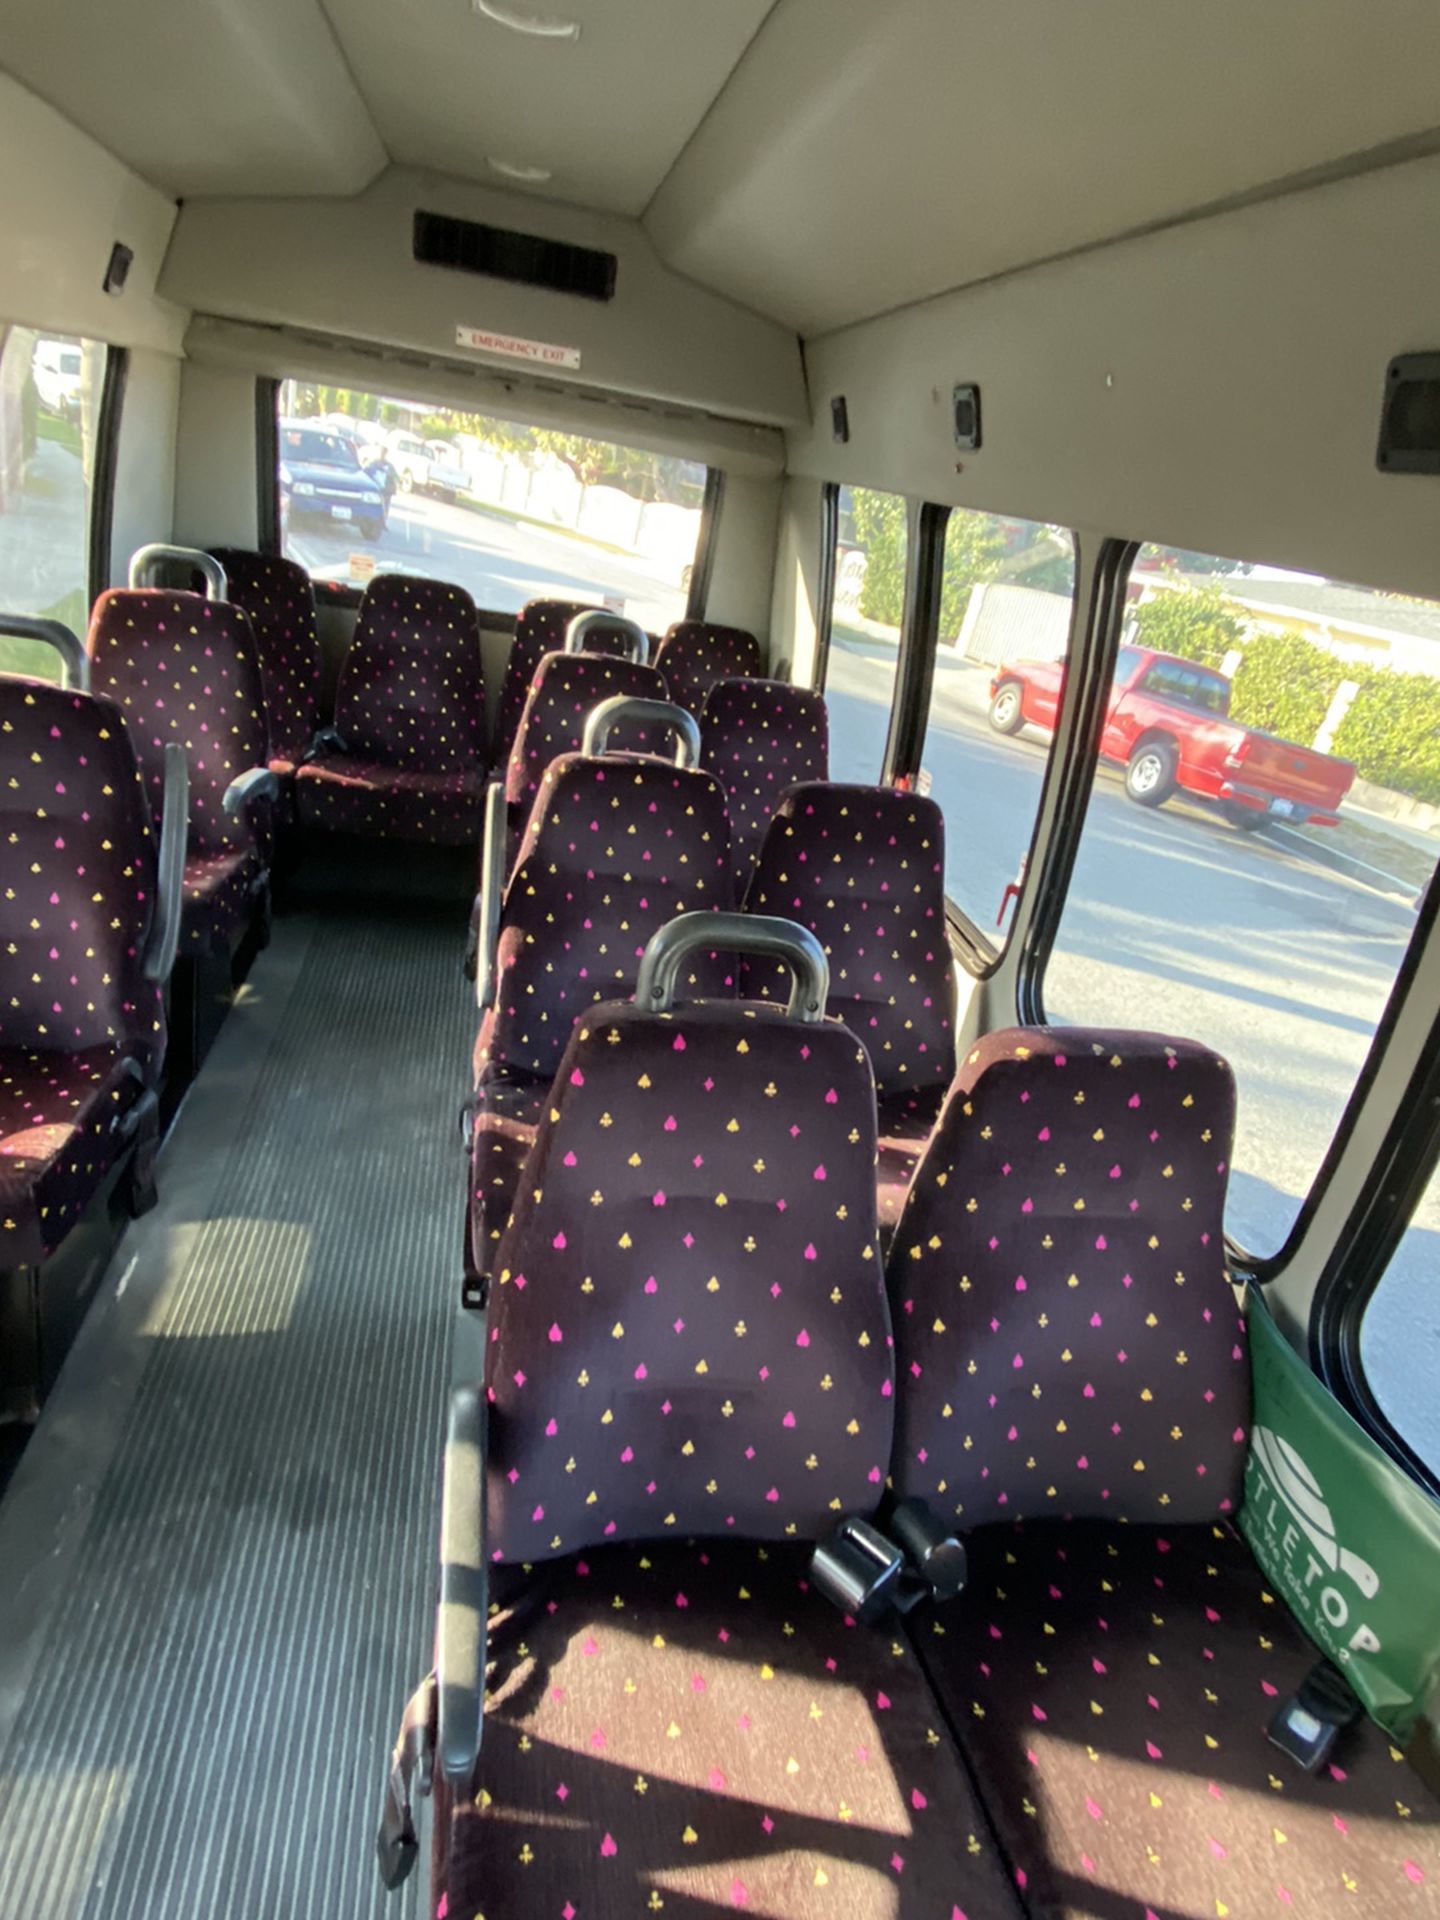 Bus or Van Transportation Seats With Seat Belts